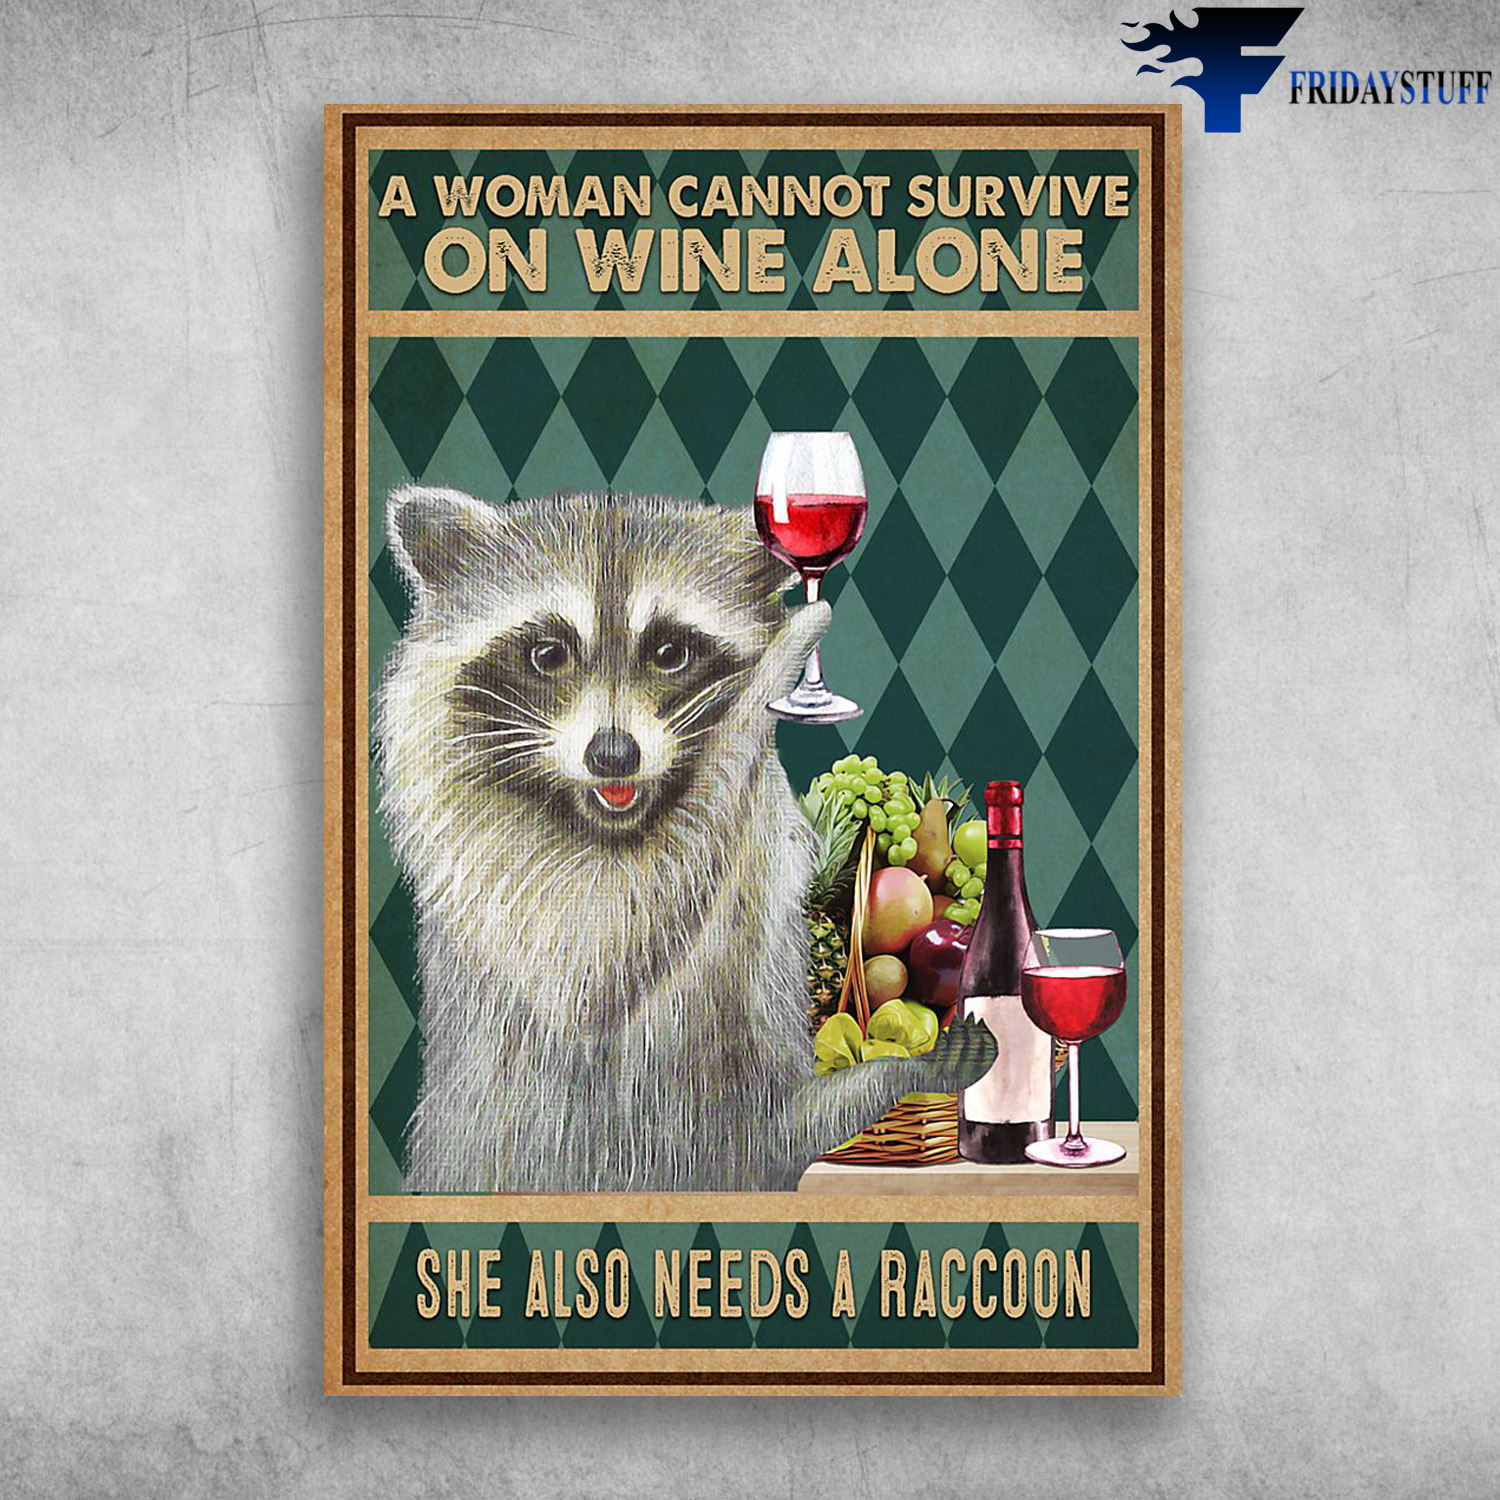 Raccoon And Wine - A Woman Cannot Survive On Wine Alone, She Also Needs A Raccoon